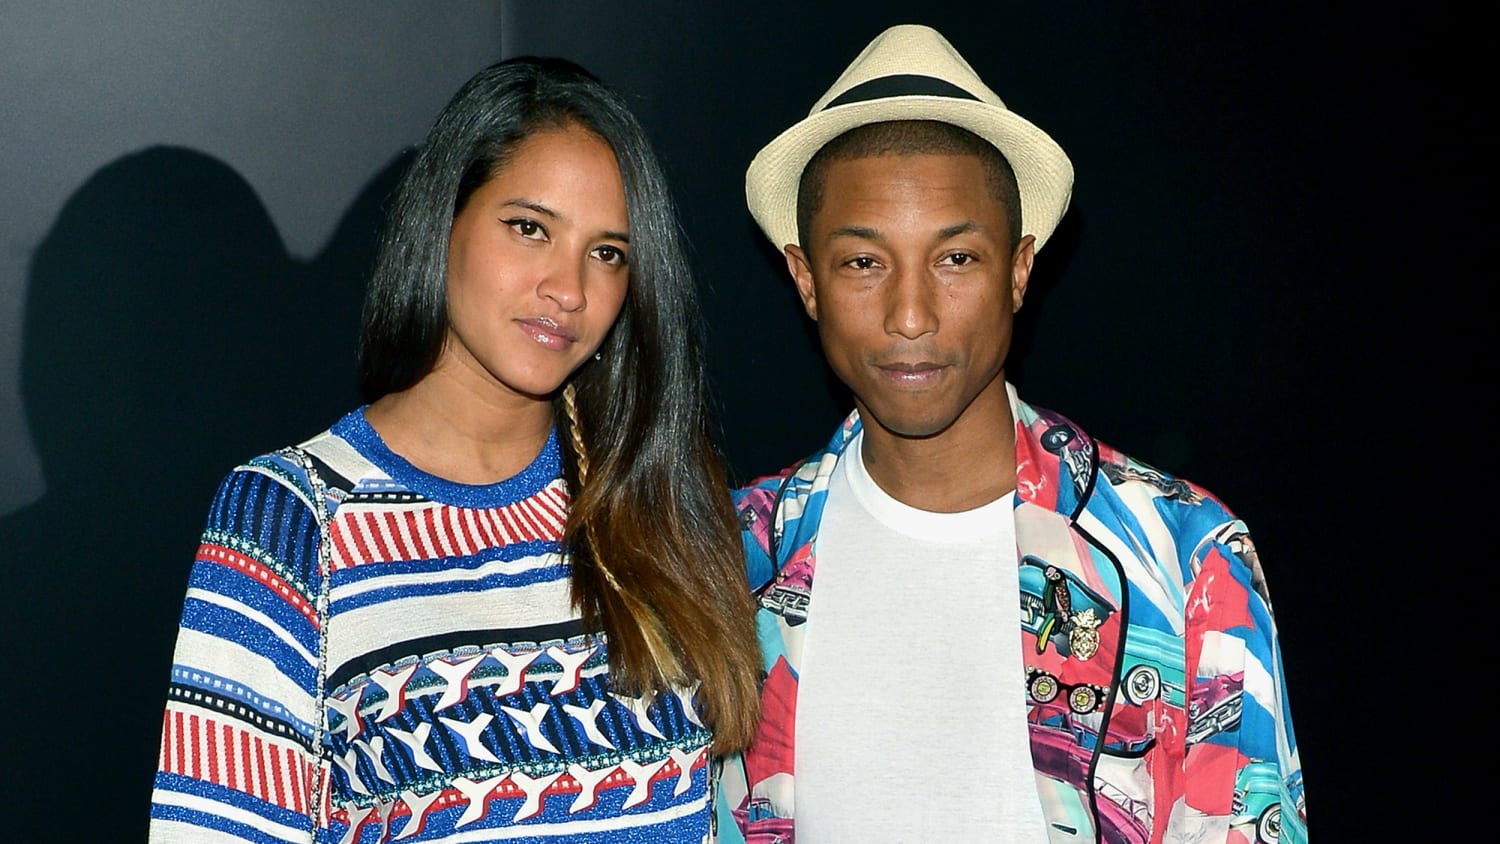 Pharrell Williams shares photo of his triplets' new shoes